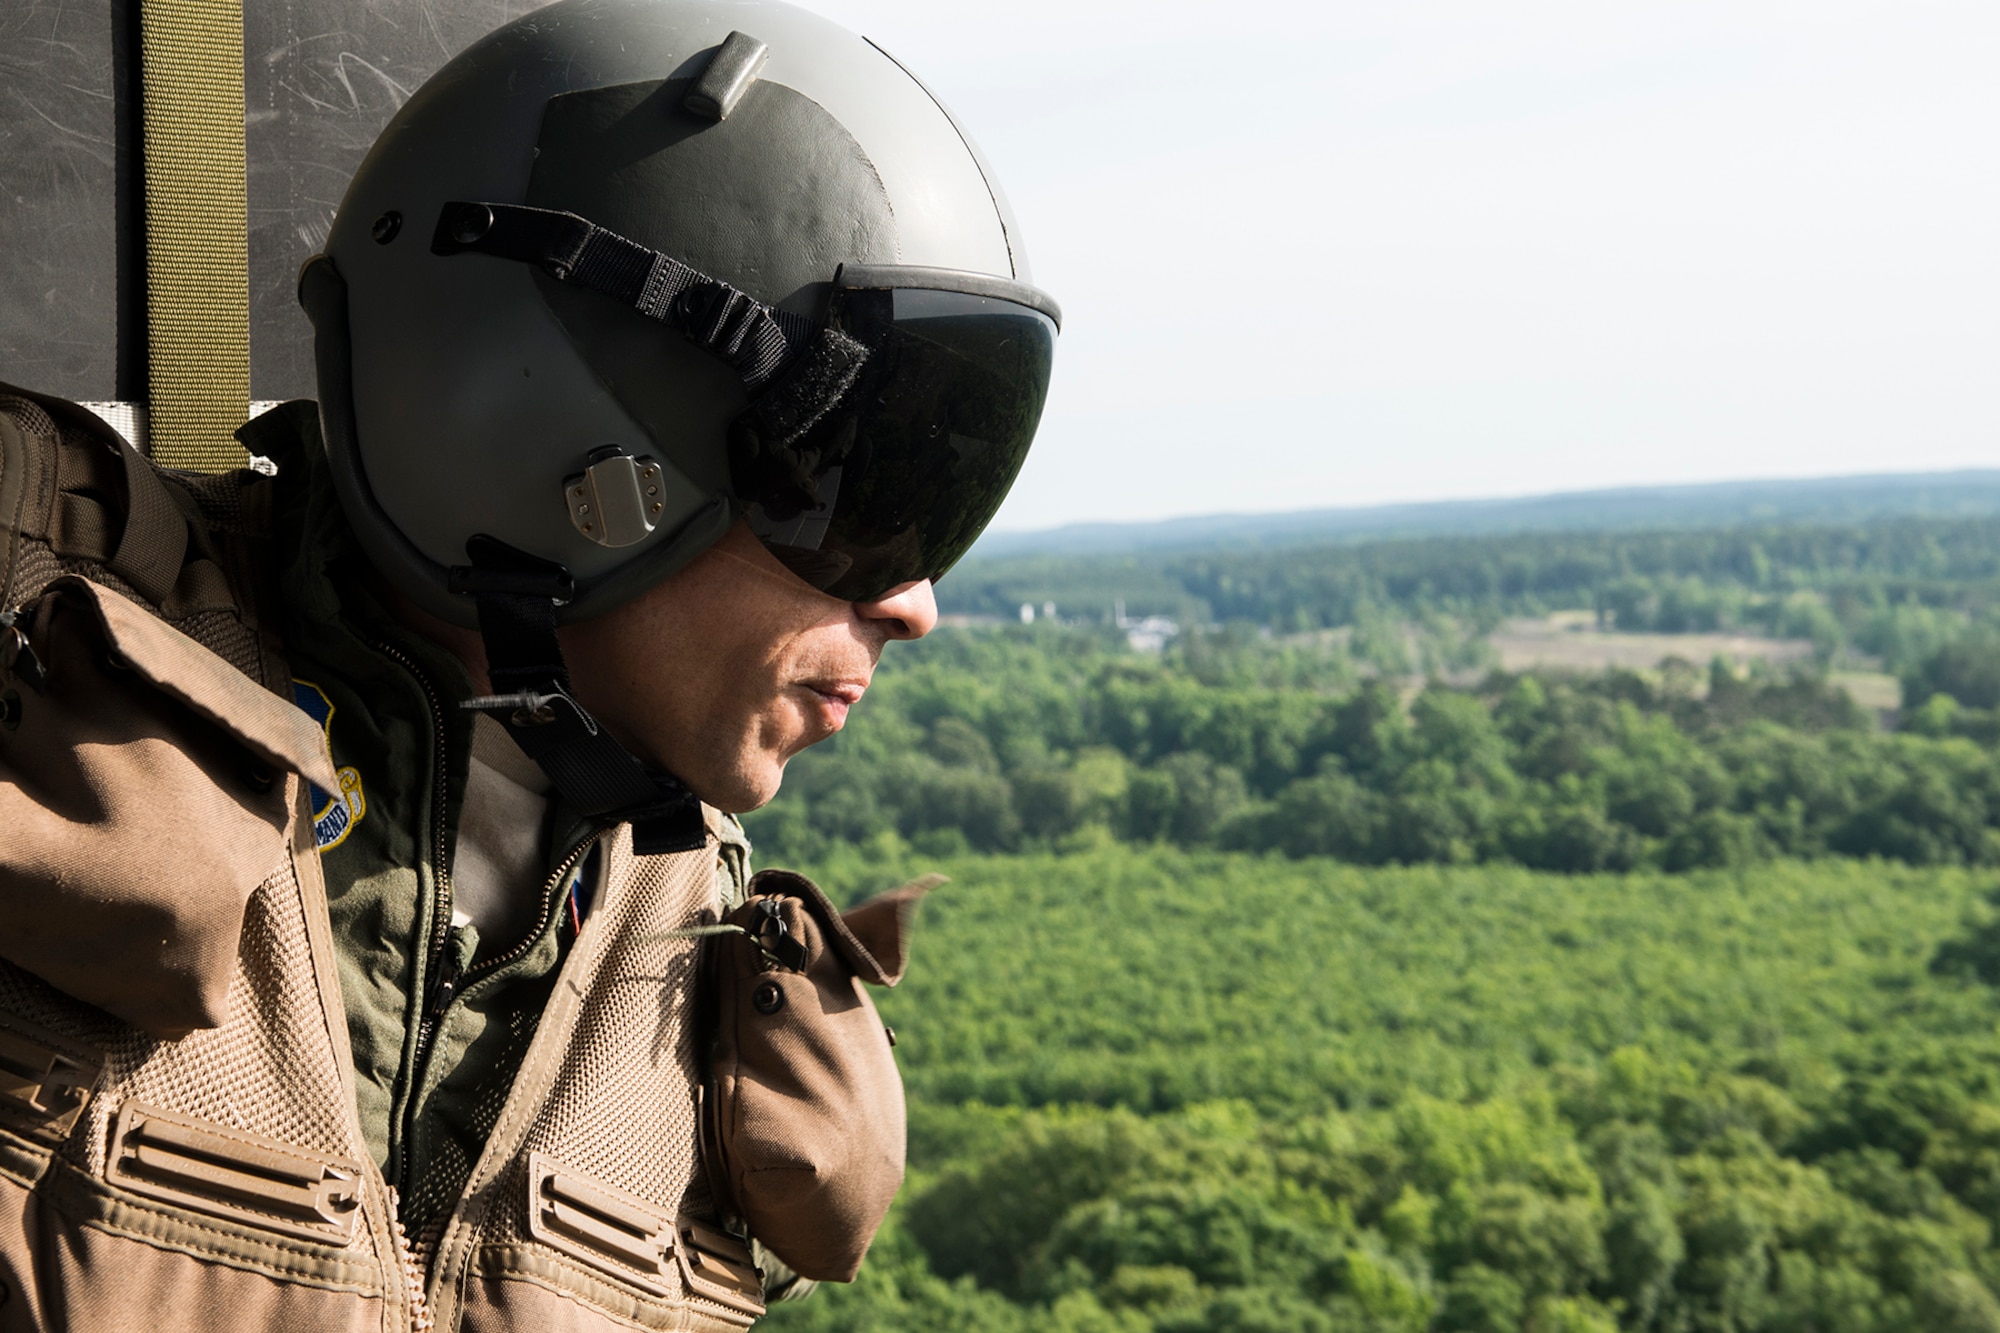 U.S. Air Force Lt. Col. Christopher Chandler, assigned to the 93rd Bomb Squadron, looks out the door of a 305th Rescue Squadron HH-60 Pave Hawk helicopter while on his way to Survival, Evasion, Resistance and Escape (SERE) training on May 14, 2015, Barksdale Air Force Base, La. SERE training gives aircrew the knowledge and tools necessary to survive on their own in any environment and under any condition should they have to abandon their aircraft. (U.S. Air Force photo by Master Sgt. Greg Steele/Released)